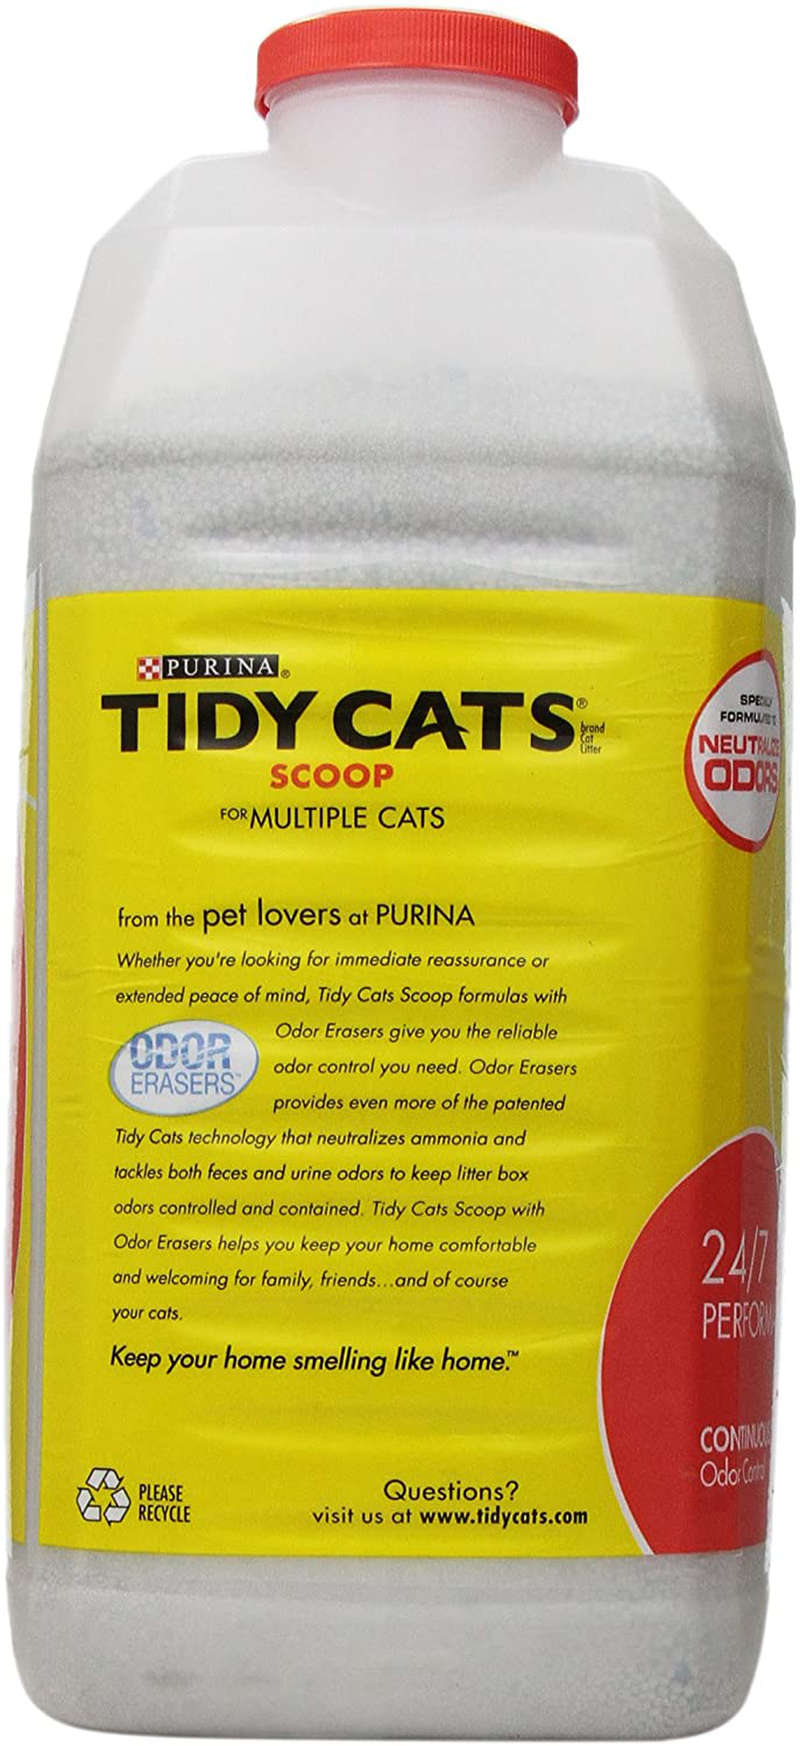 Tidy Cats Scoop Cat Litter Box, for Multiple Cats, 20 Lbs